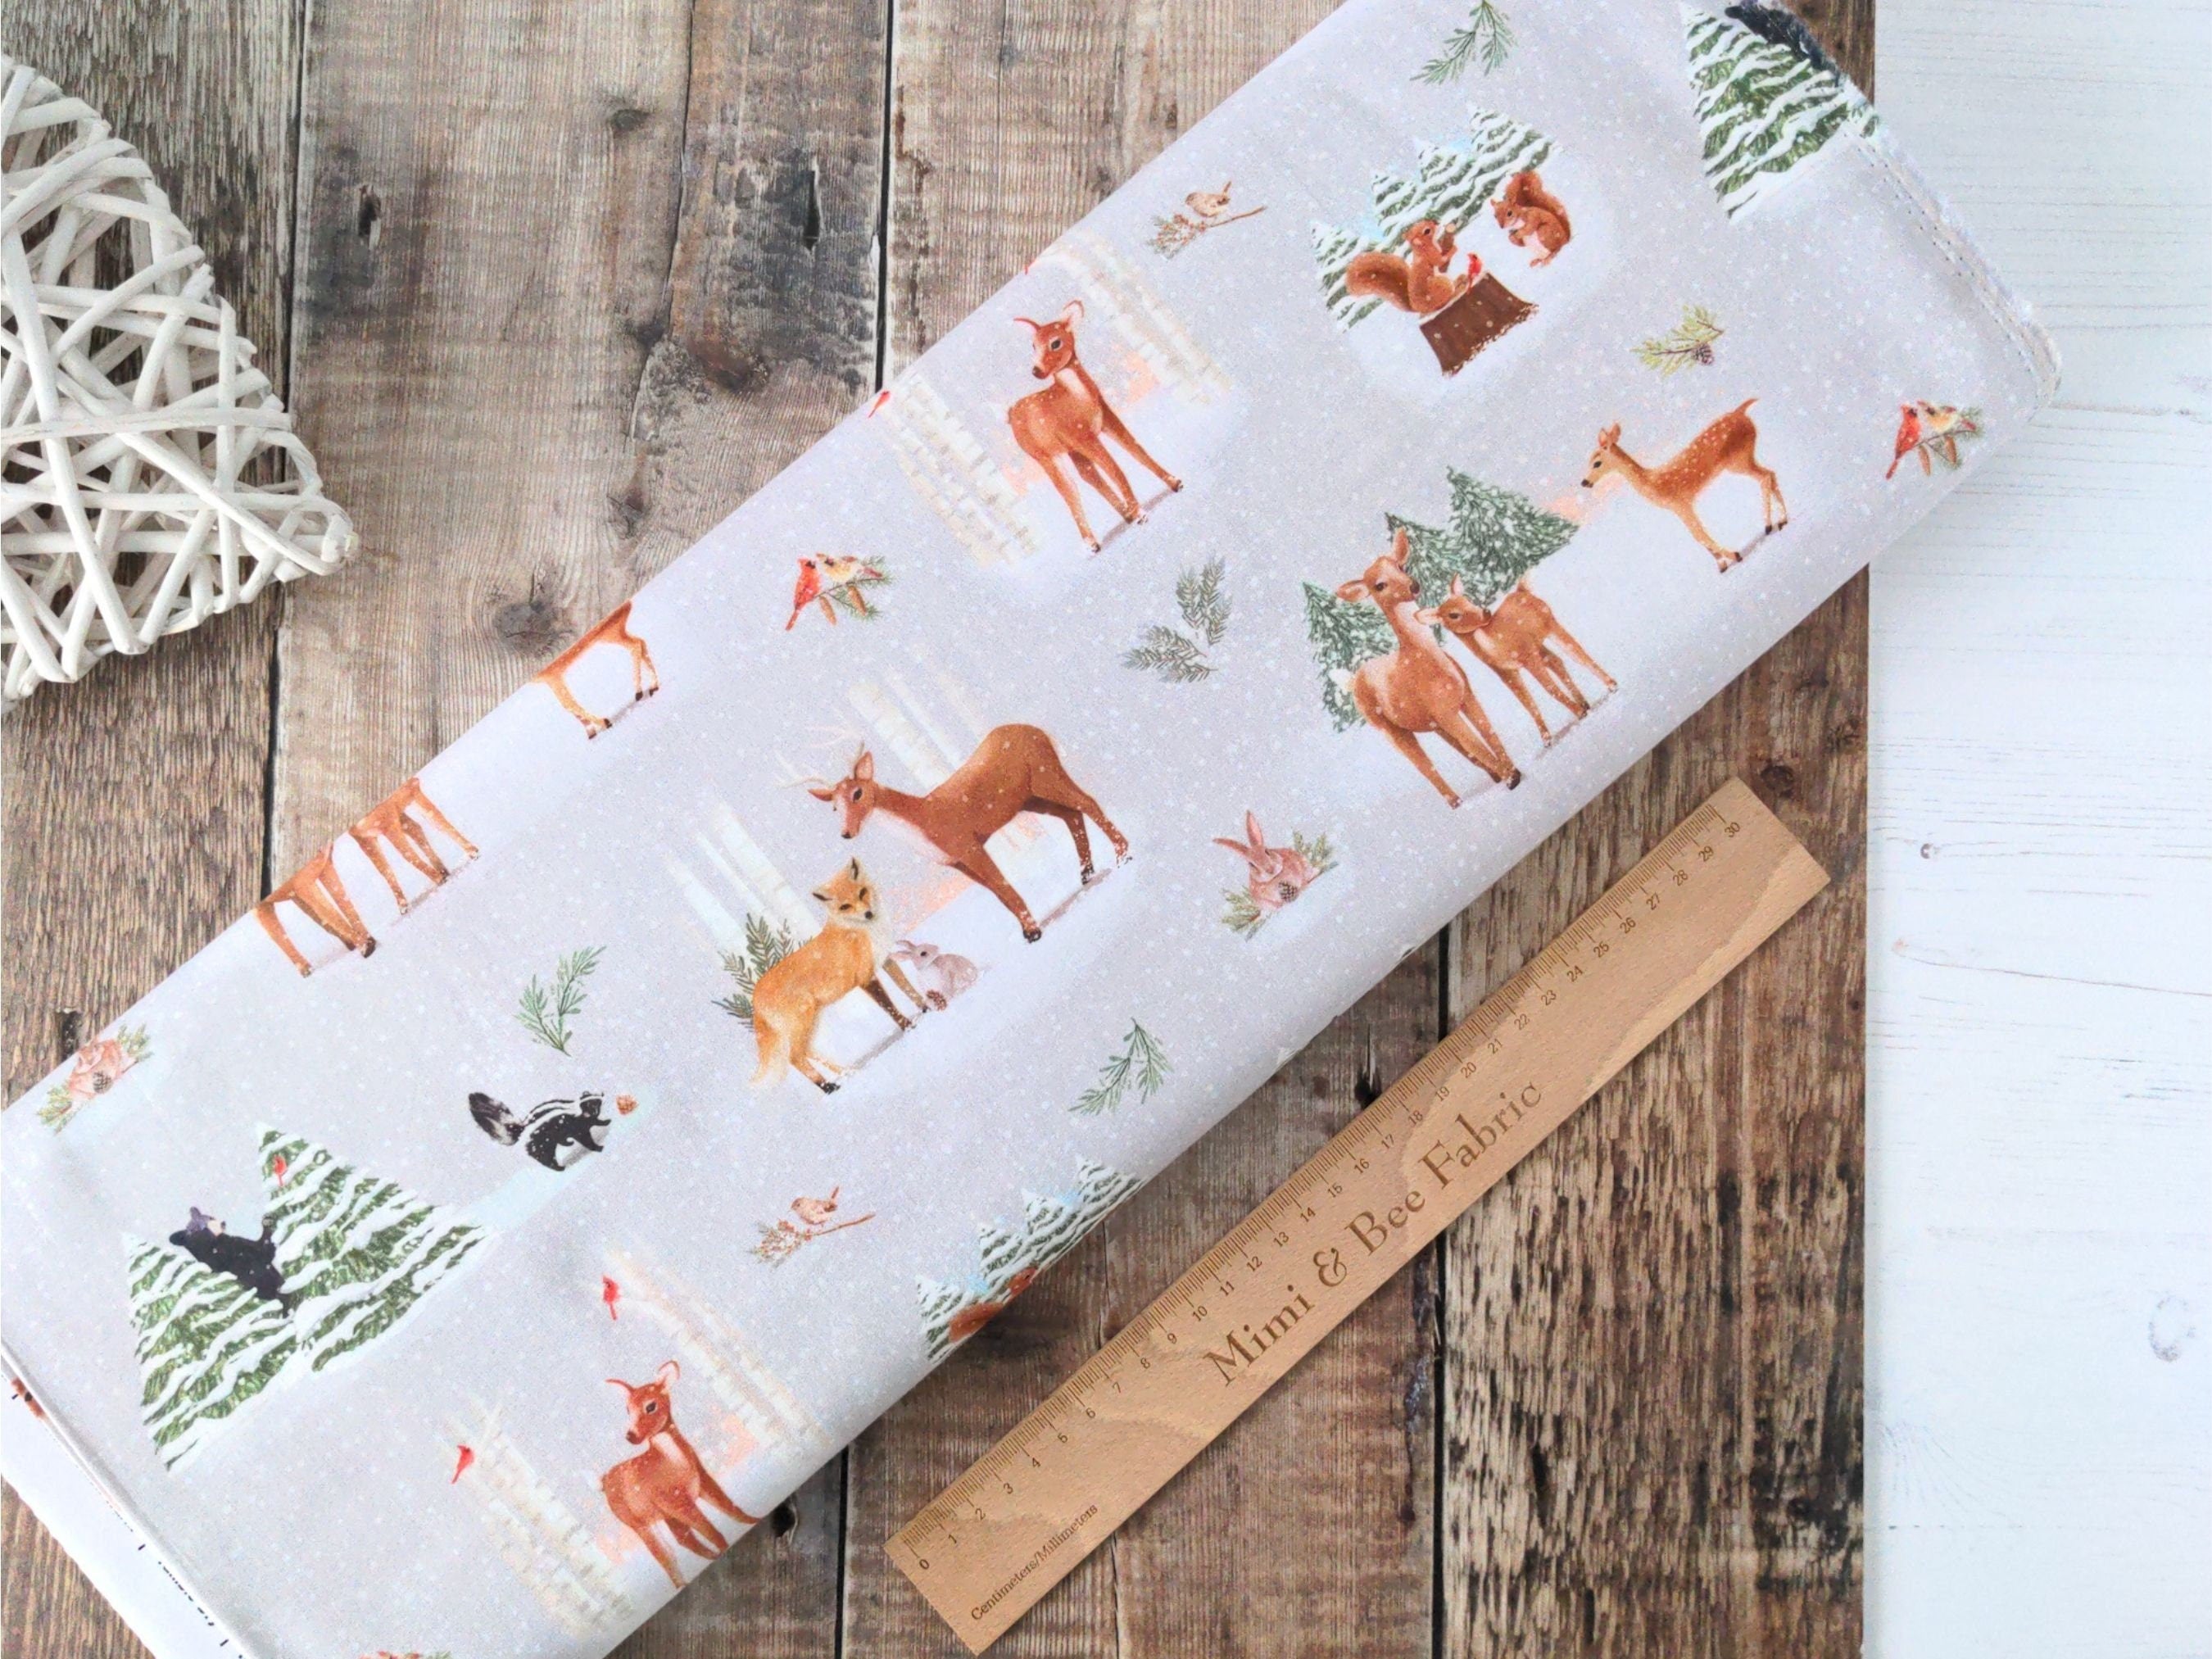 Black bears, skunks, foxes, rabbits, squirrels and deer in the snowy forest on light grey cotton